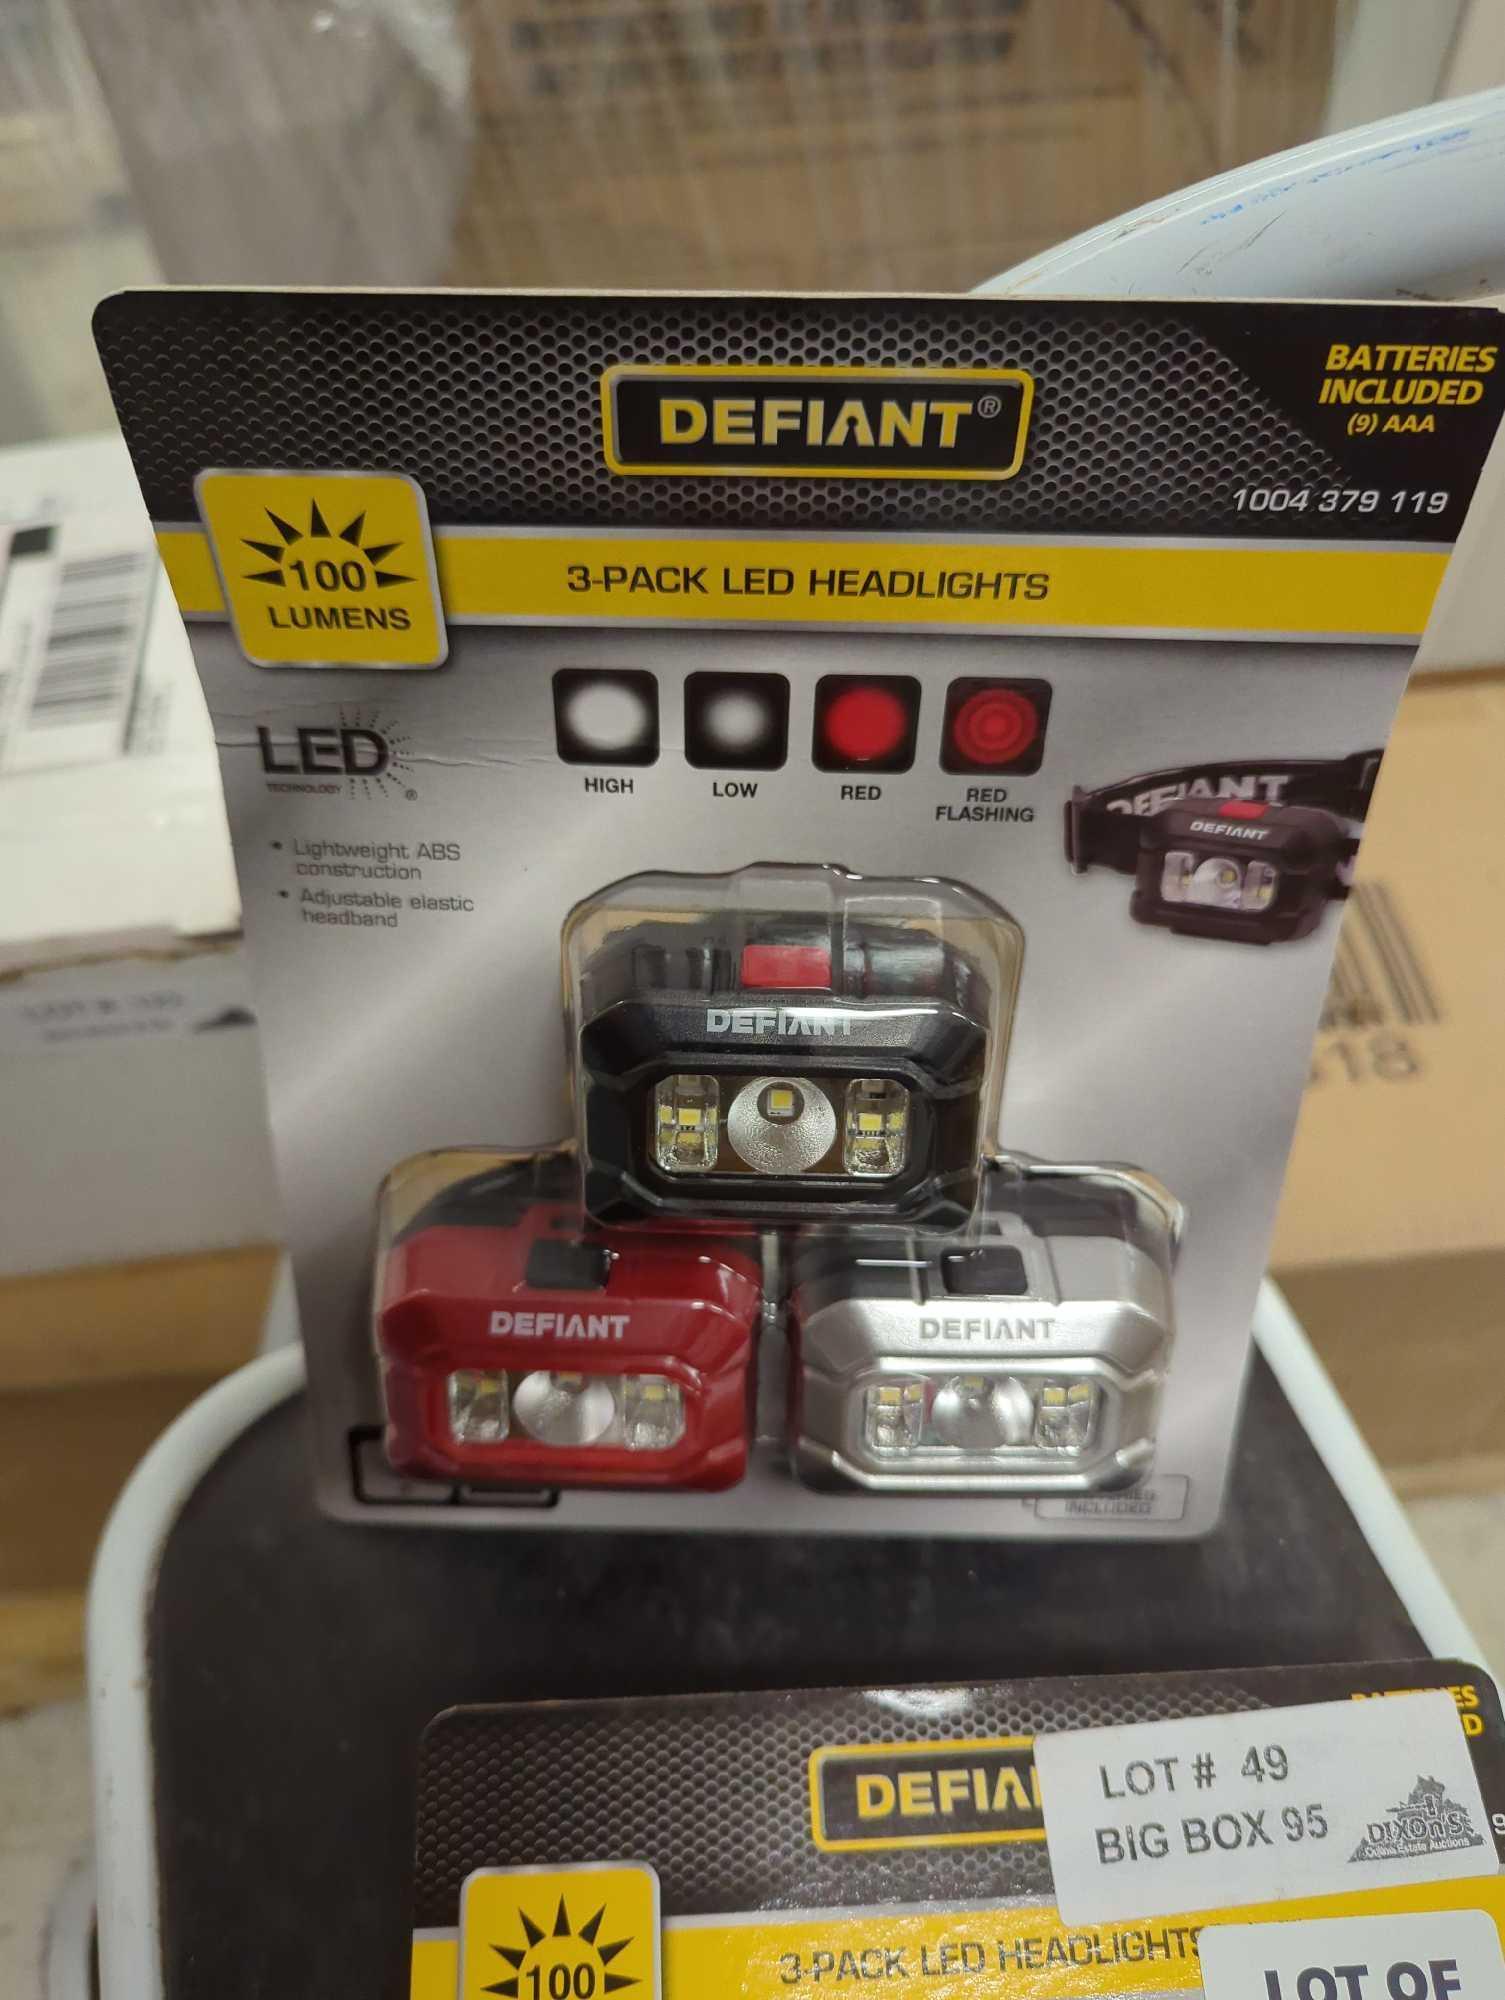 Lot of 2 Defiant 100 Lumens LED Headlight Combo, Appears to be New in Factory Sealed Package Retail